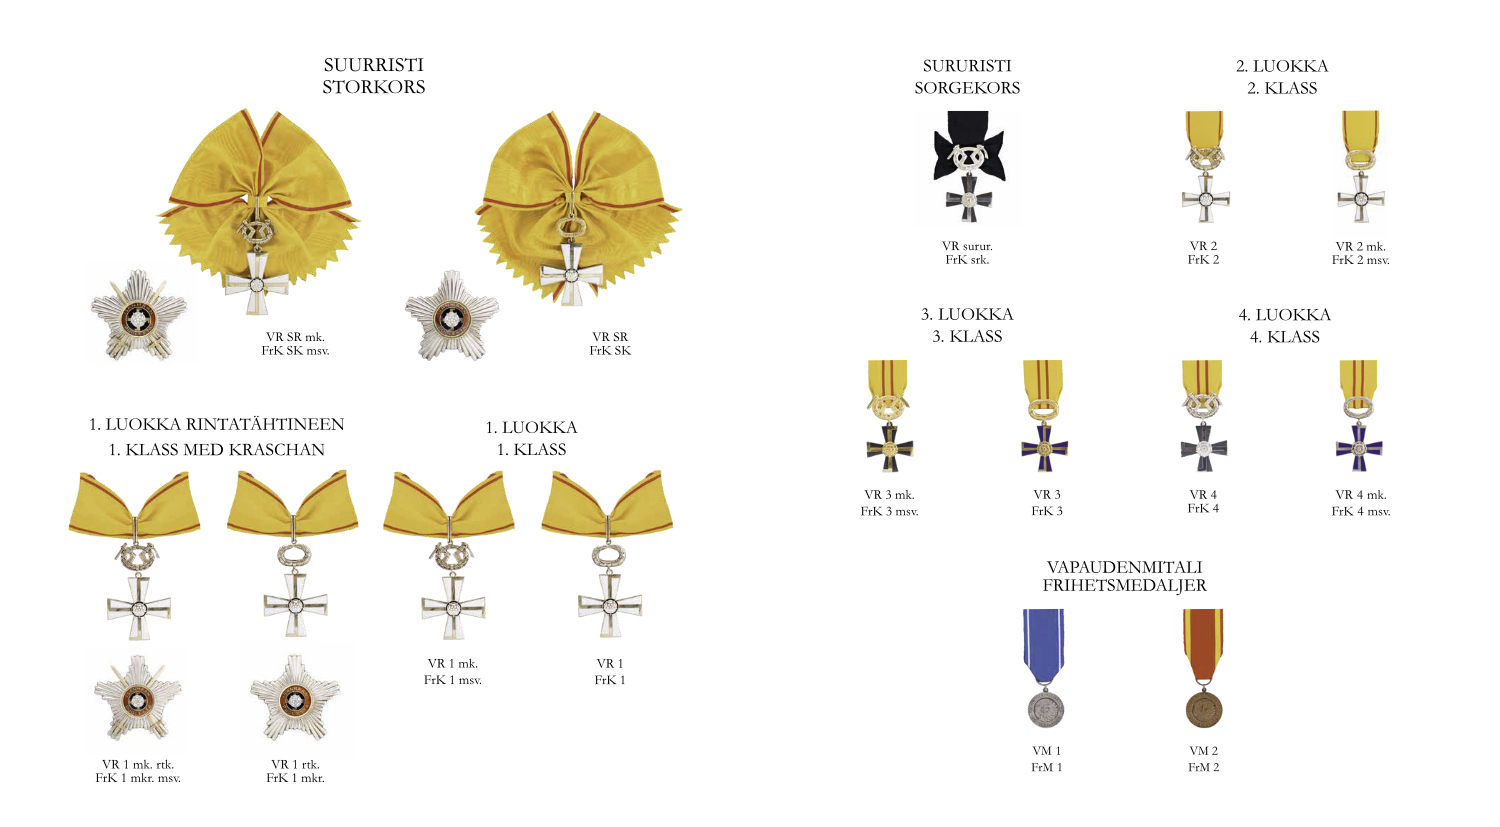 Decorations of the Order of the Cross of Liberty awarded in peacetime